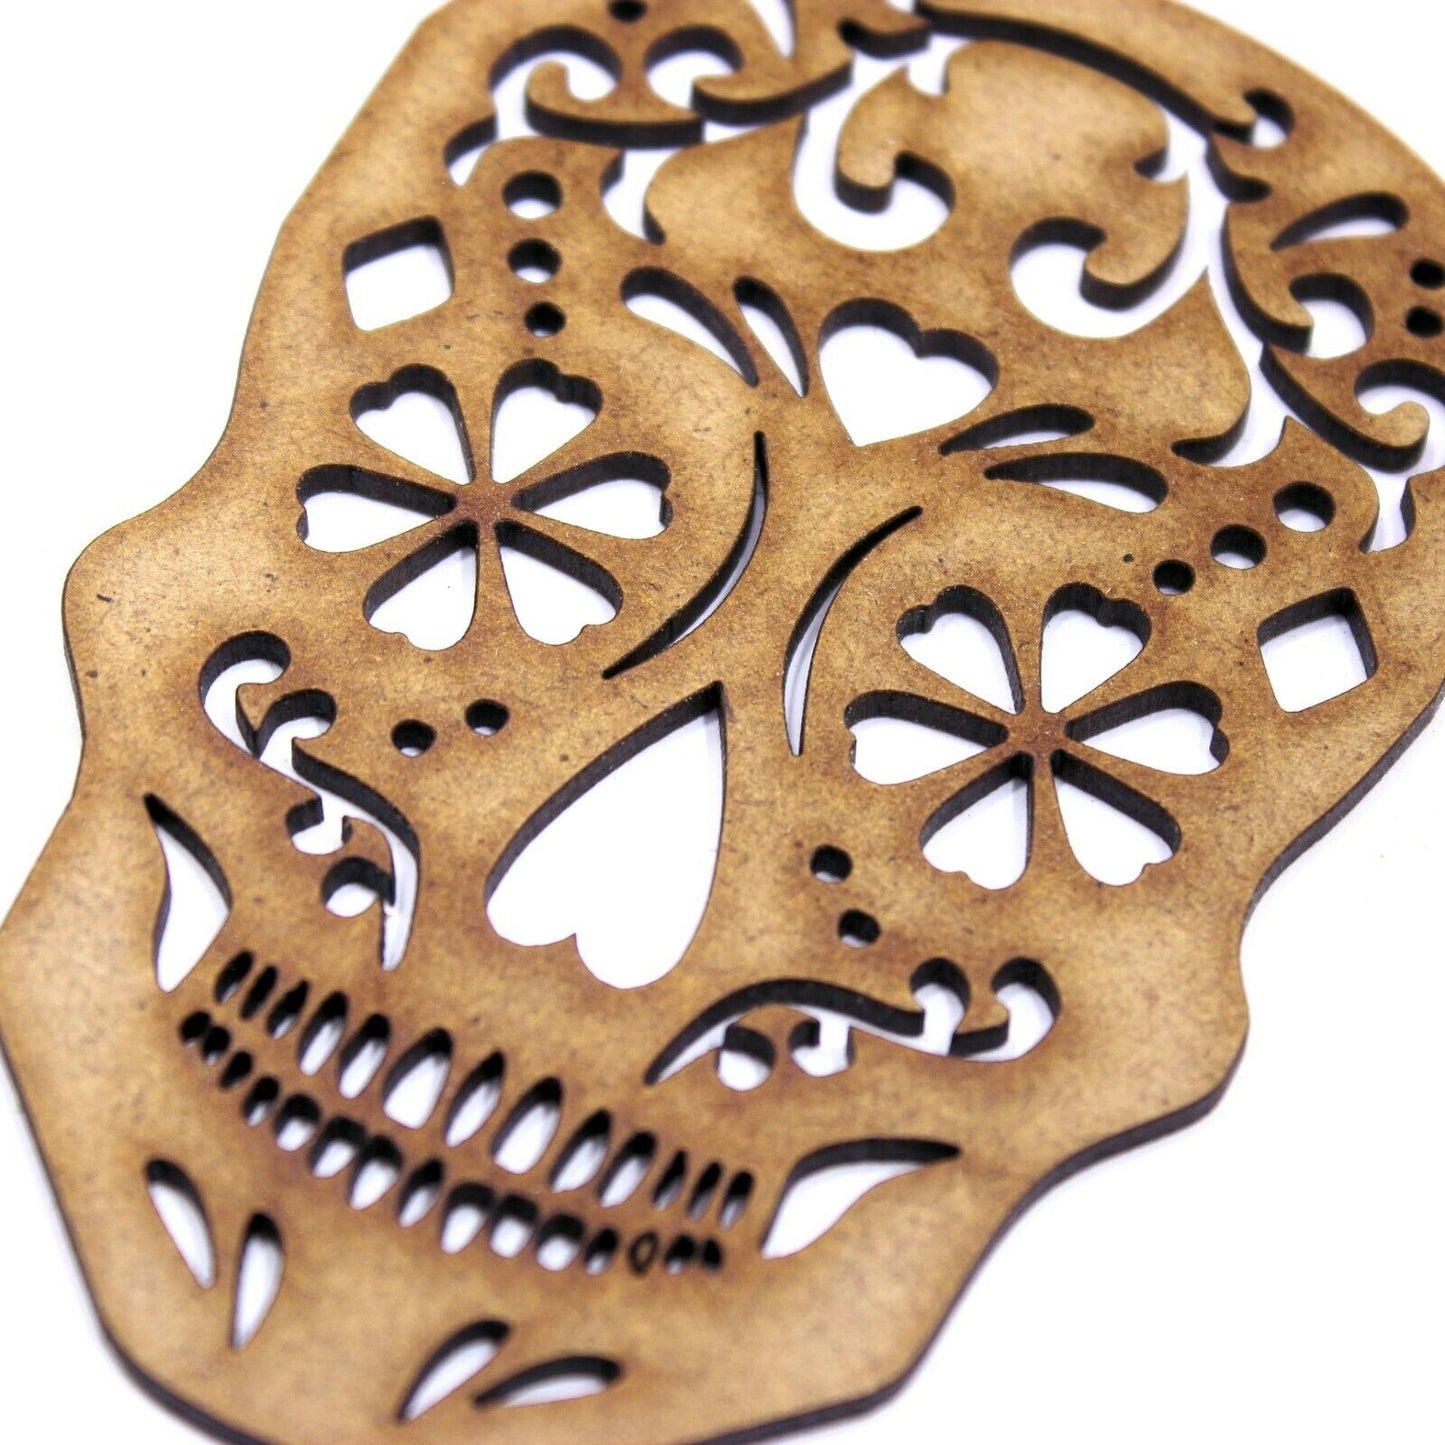 Sugar Skull 2mm MDF Wood. Halloween 10cm to 20cm, Mixed Media, Day of the Dead